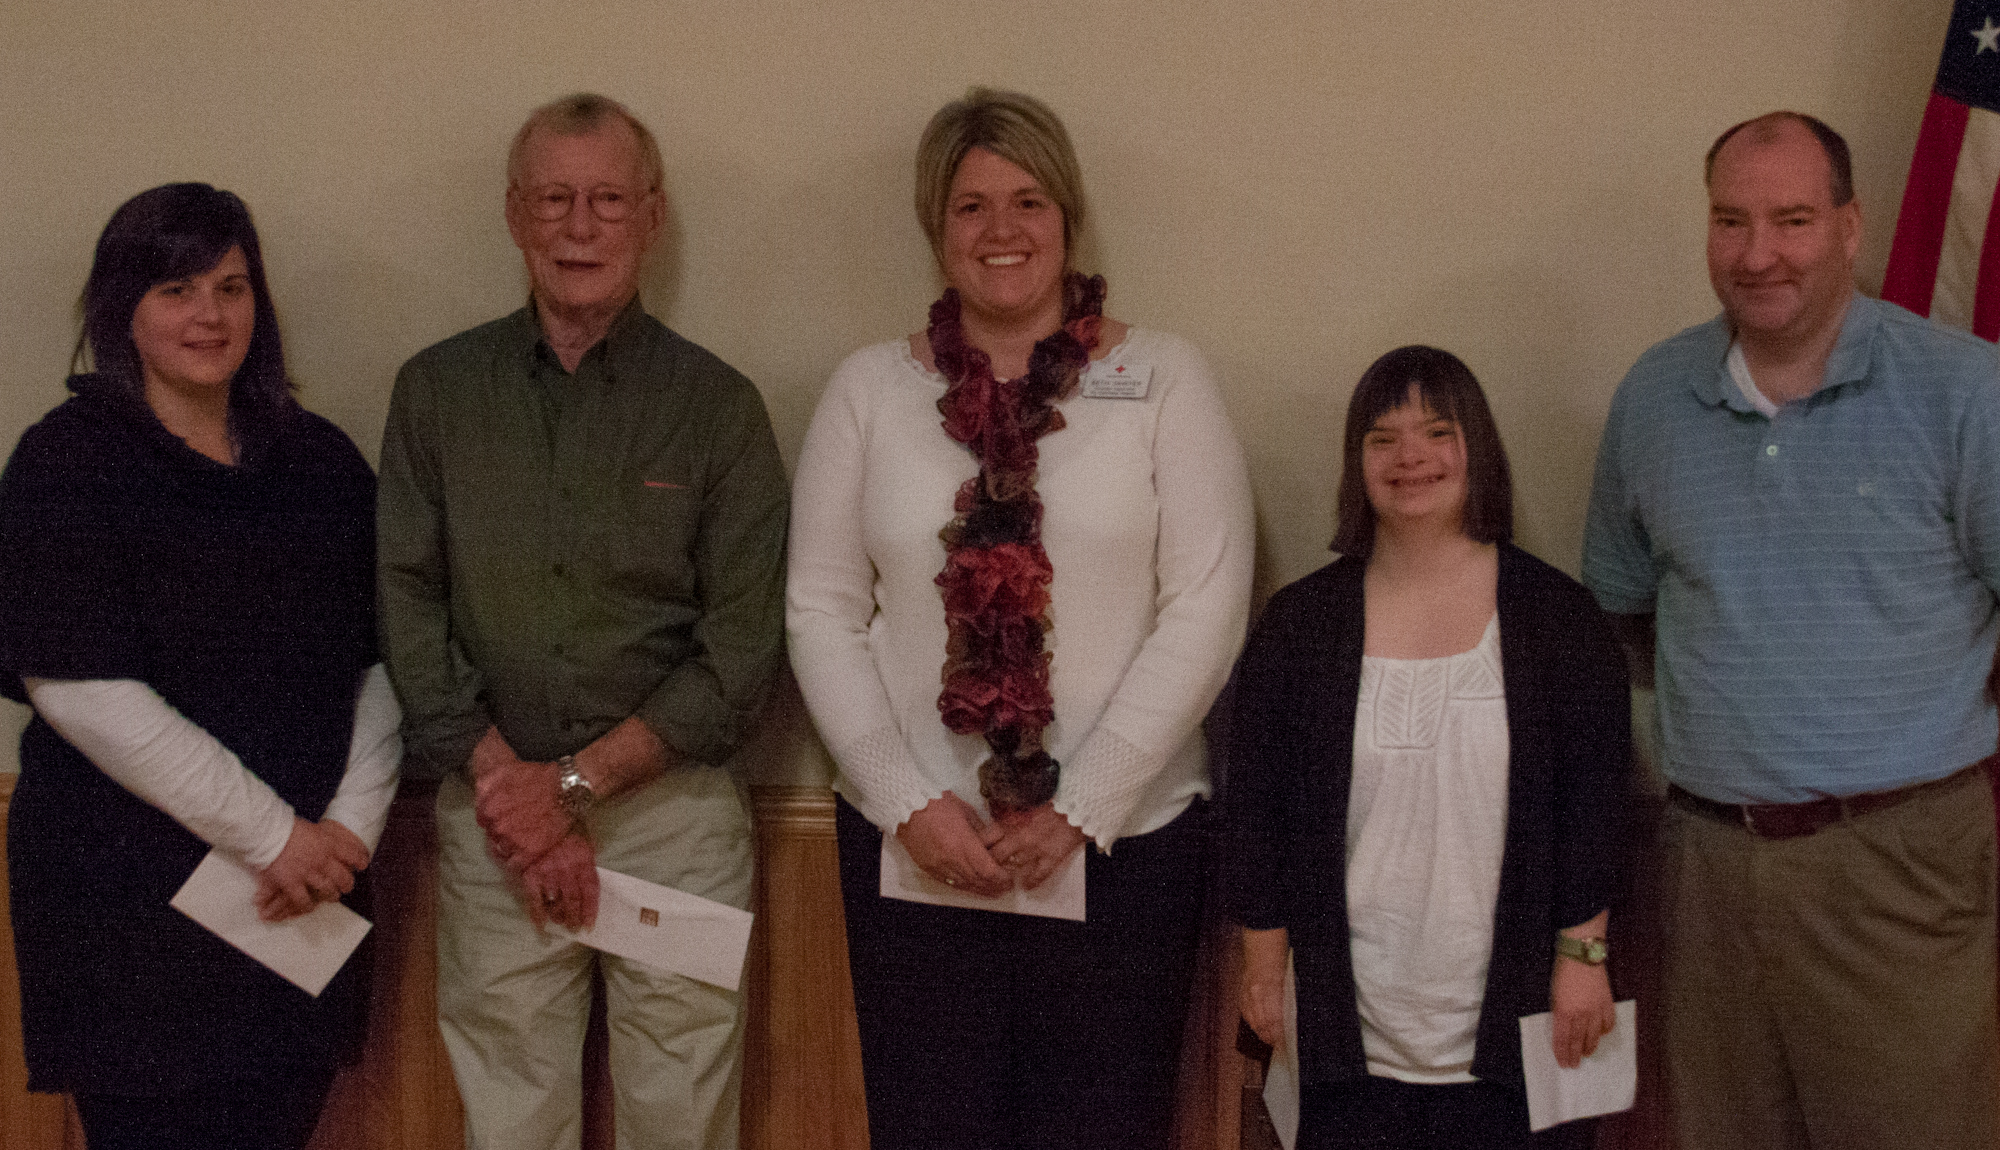 Pictured are organization representatives that received donations. From left to right, the reps are from Shaw Public Library, Clearfield-Lawrence Township Airport Authority, American Red Cross, Special Olympics of Clearfield County and the Elks' presenter David Wright.